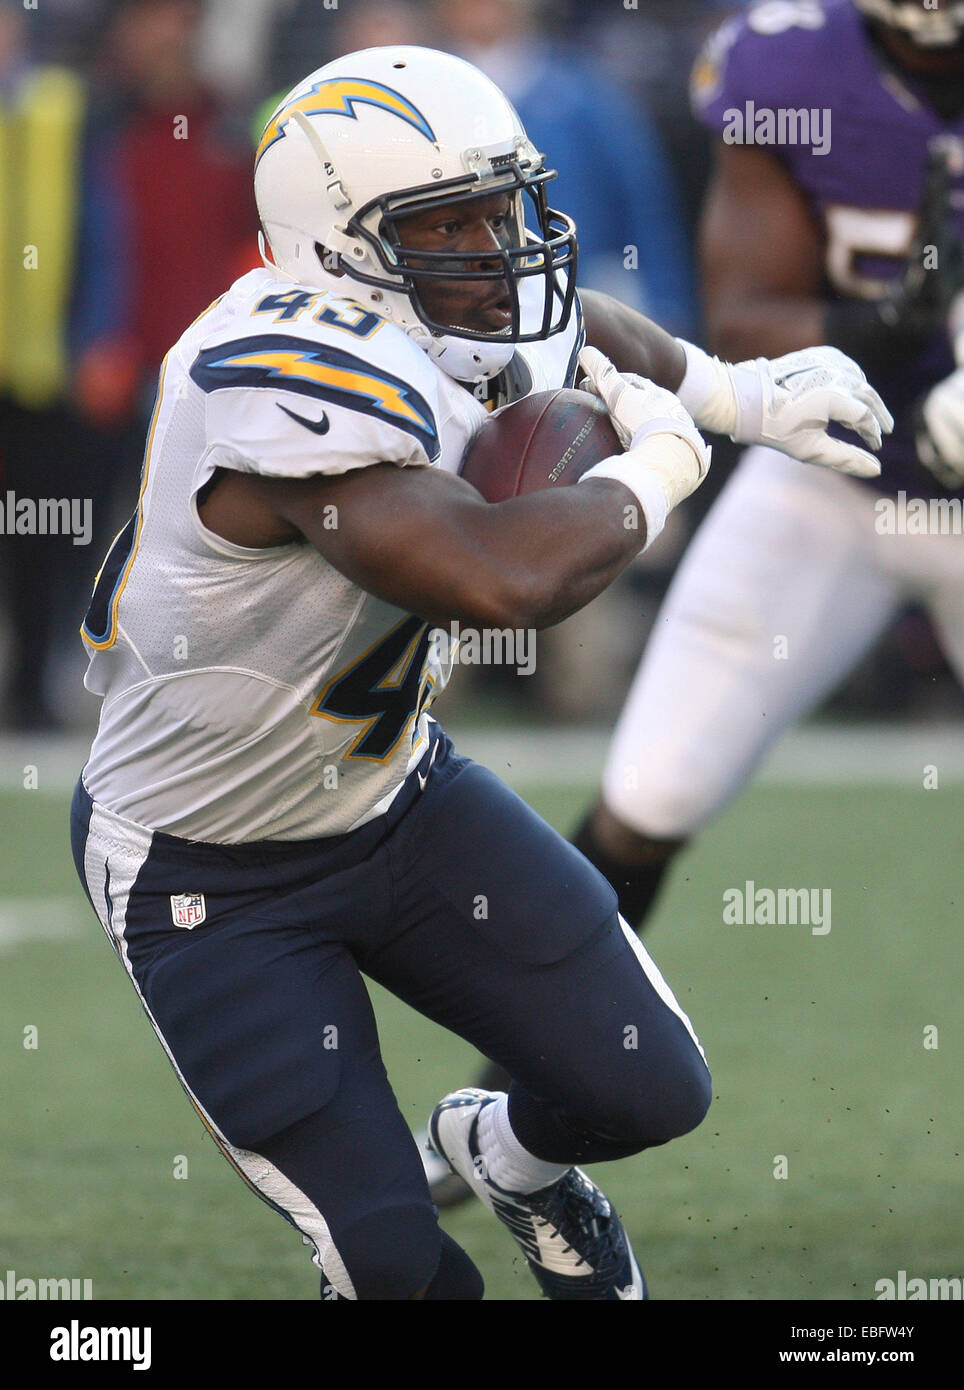 Baltimore, Maryland, USA. 30th November, 2014. San Diego Chargers RB Branden Oliver (43) runs the football. San Diego Chargers defeat the Baltimore Ravens 34-33 at M&T Bank Stadium in Baltimore, MD on November 30, 2014. Photo: Mike Buscher/Cal Sport Media/Alamy Live News Stock Photo